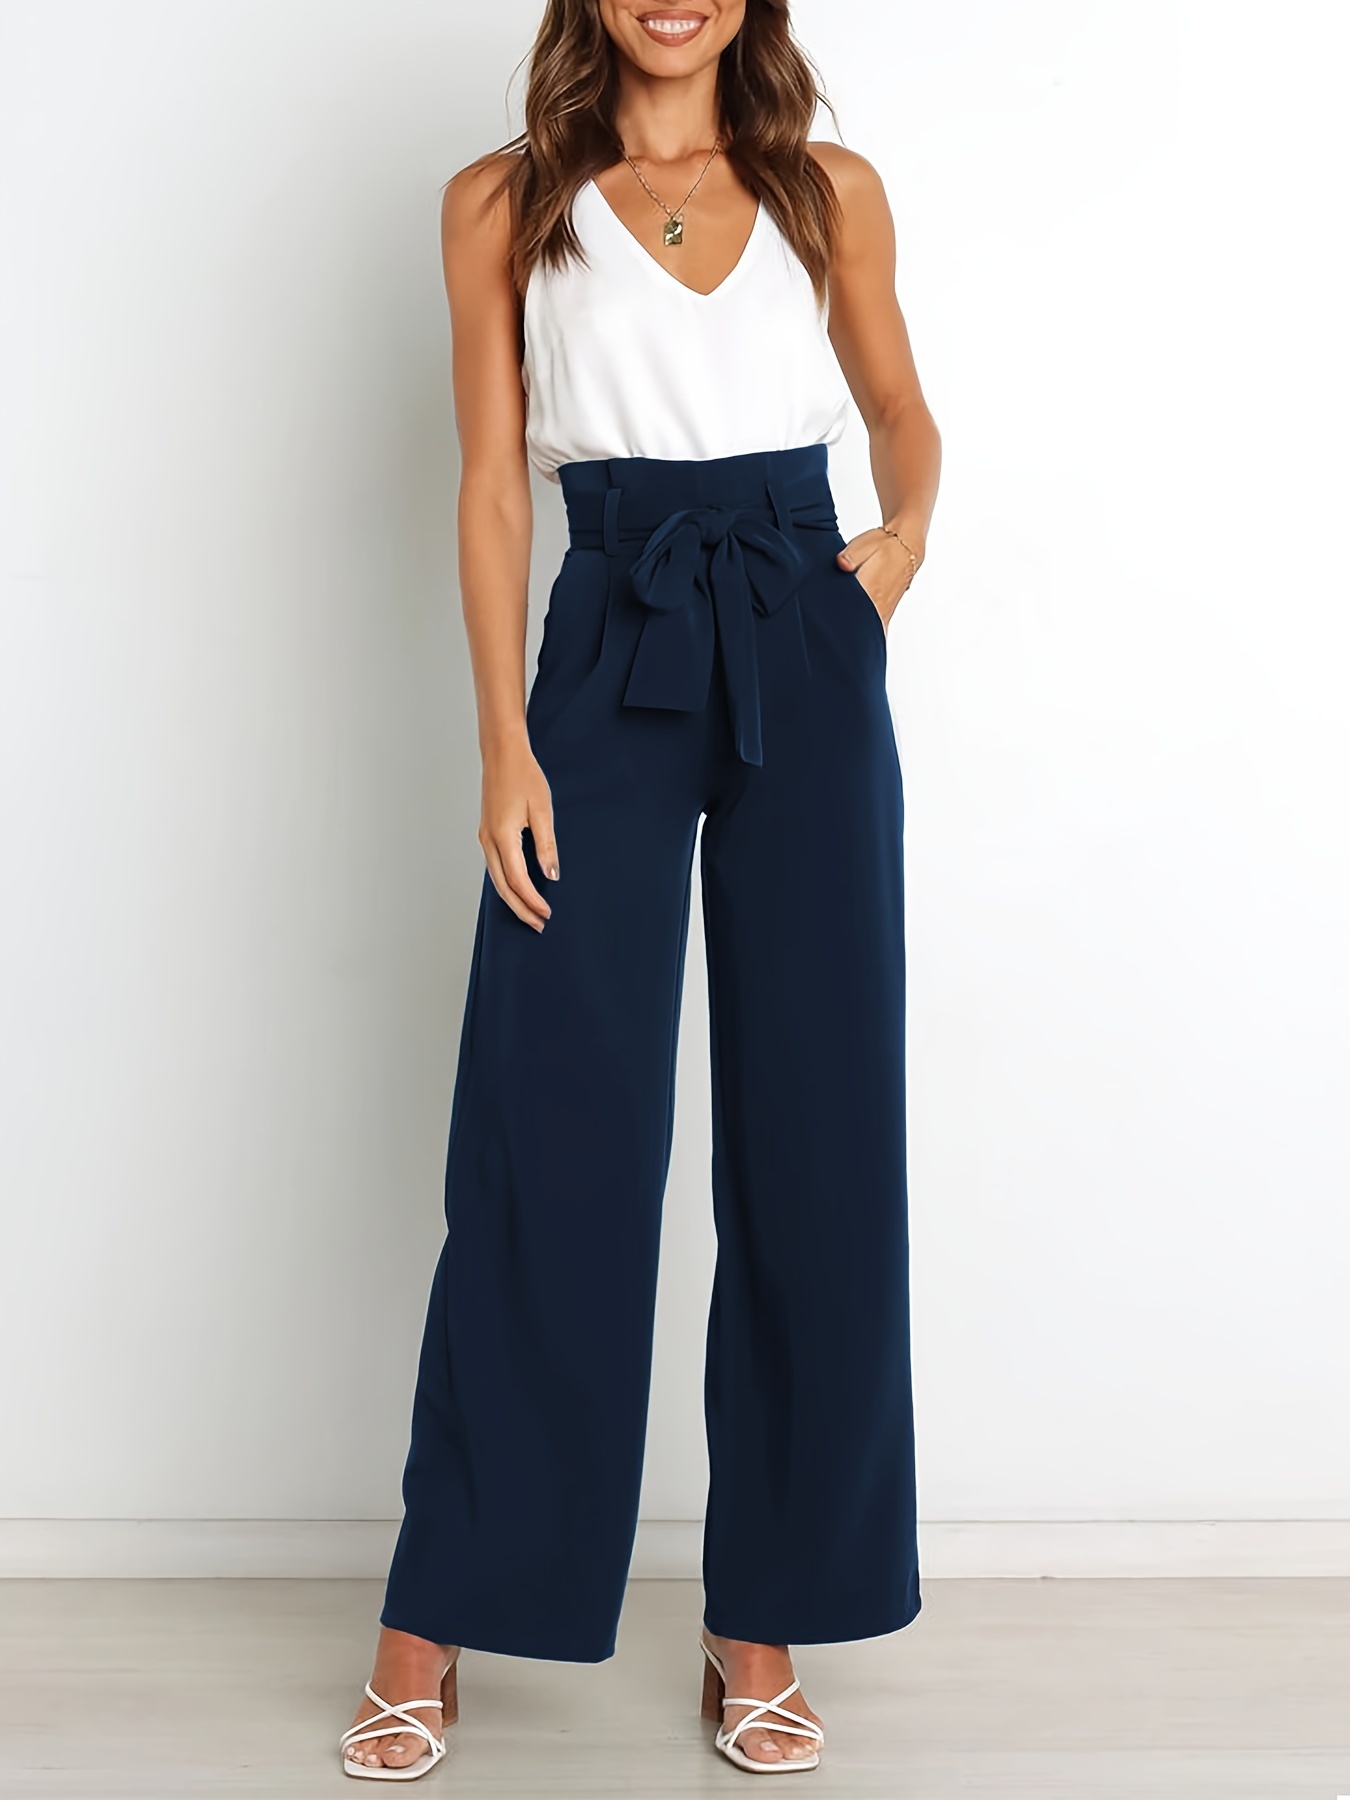  New Woman's Casual Full-Length Loose Pants - Solid